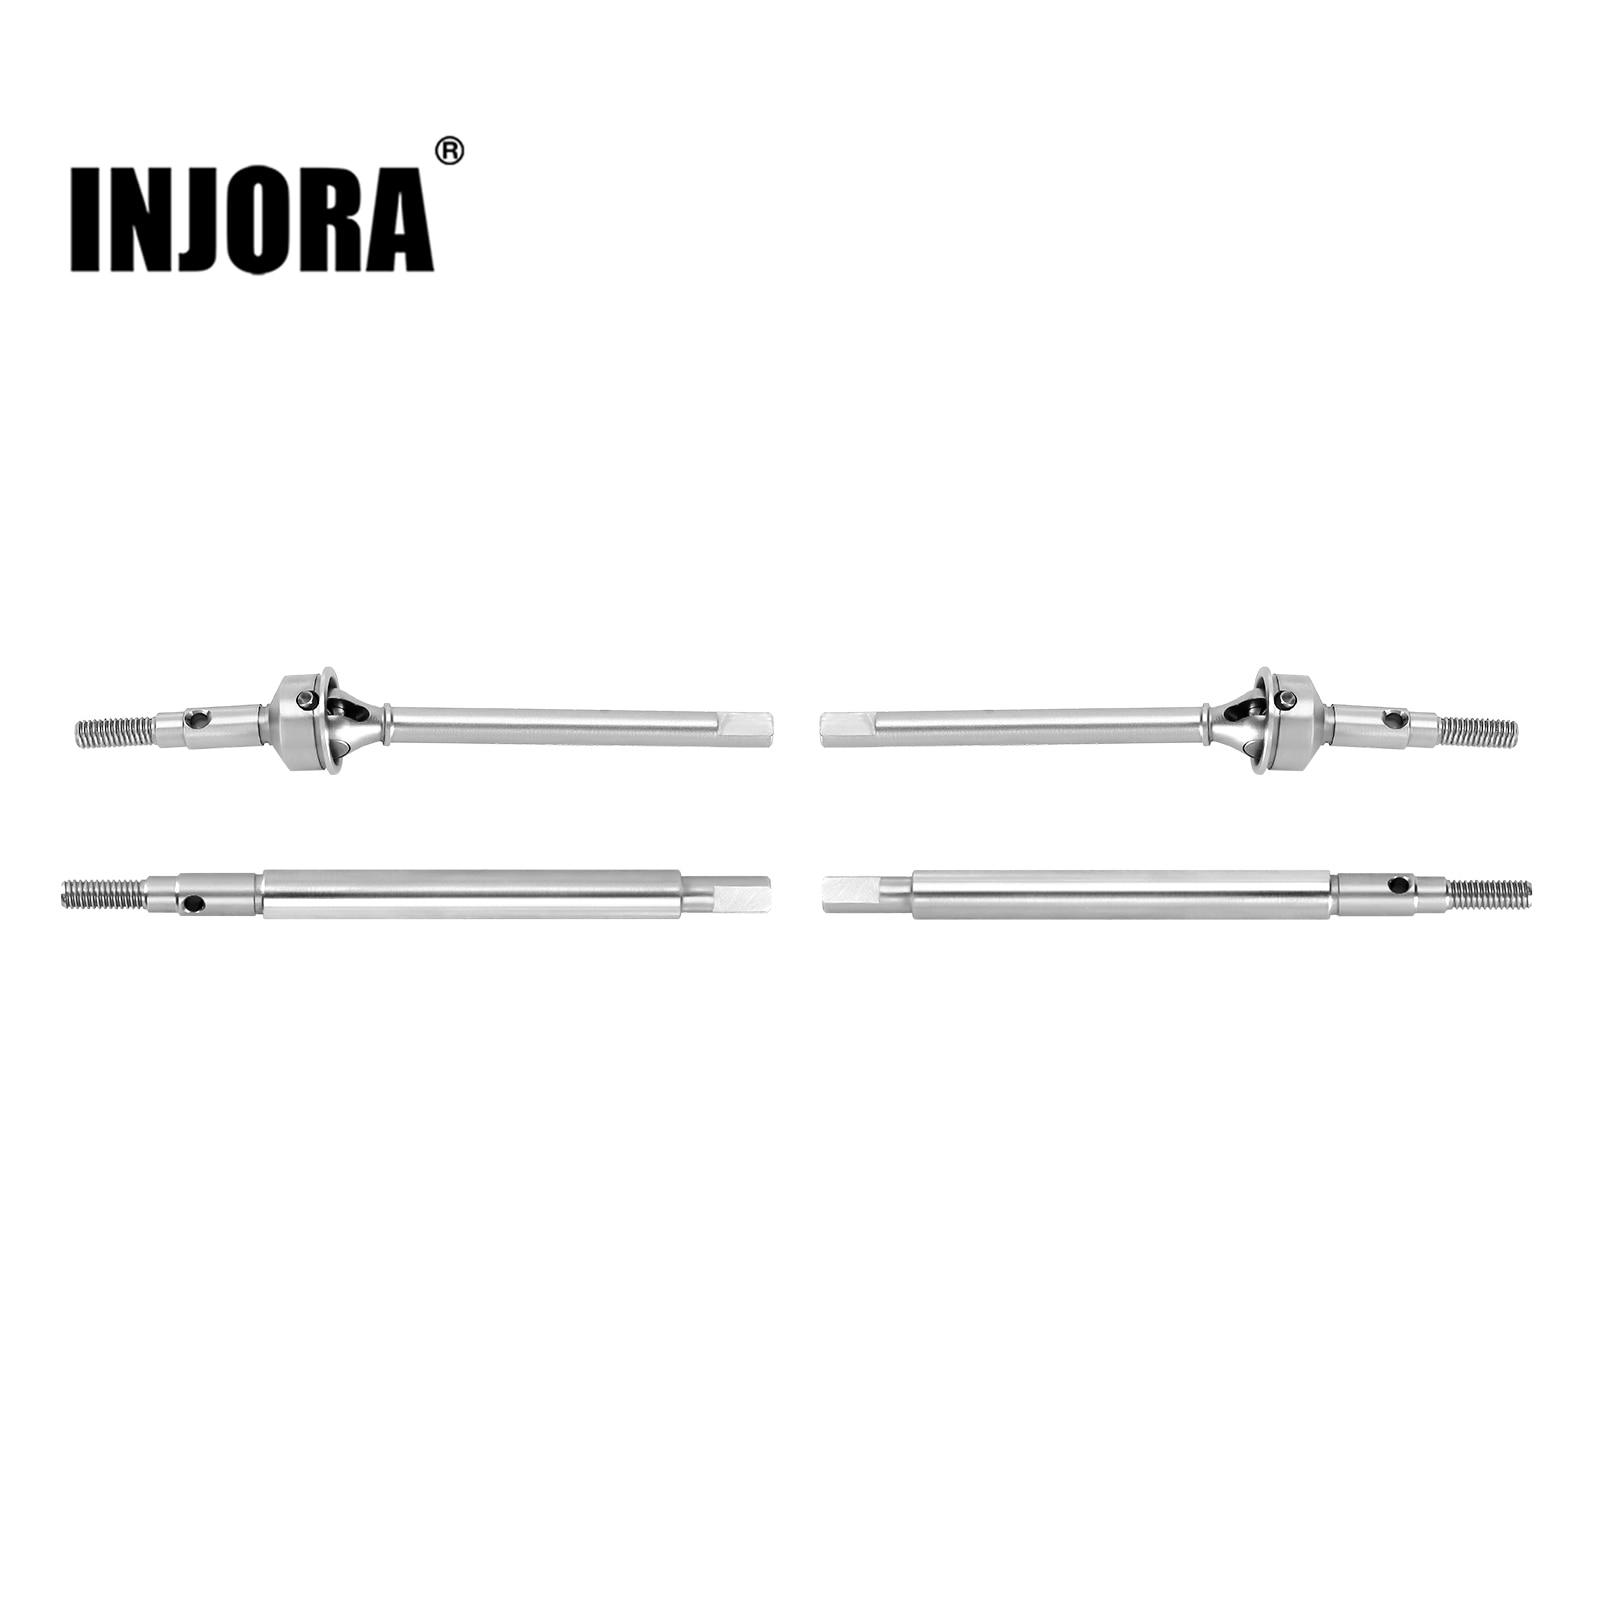 INJORA-Extended-2mm-Thread-Stainless-Steel-Front-Rear-Axle-Shafts-For-1-18-RC-Crawler-TRX4M.jpg